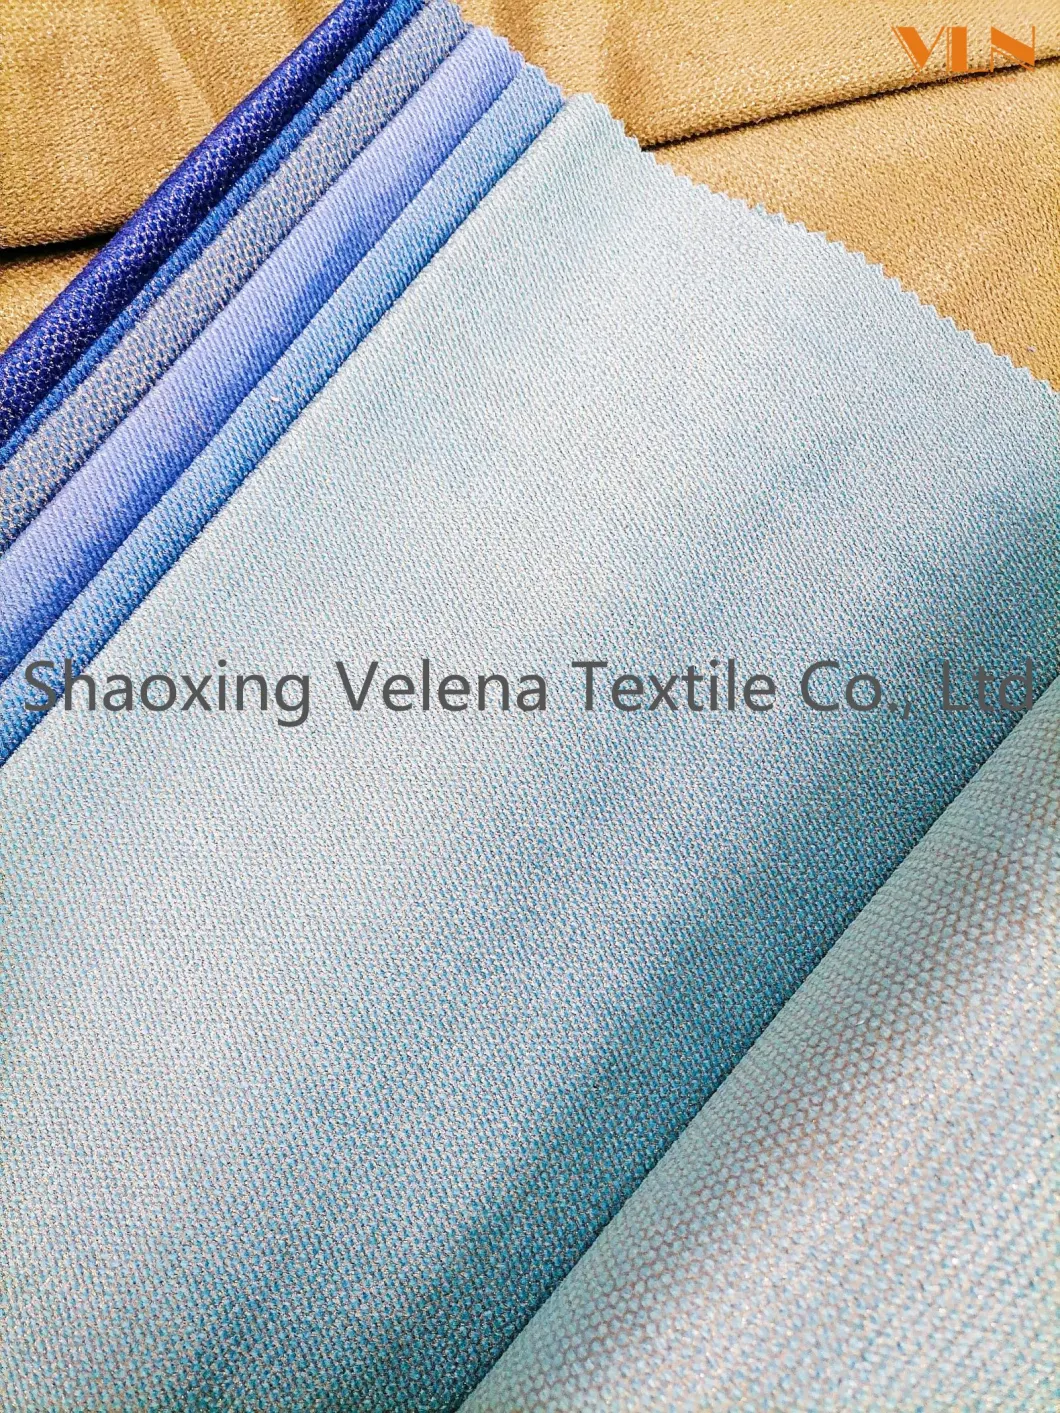 Hot Sale Jaguar Twill Velvet Dyeing with Foil Upholstery Furniture Home Textile Sofa Fabric China Manufacturer